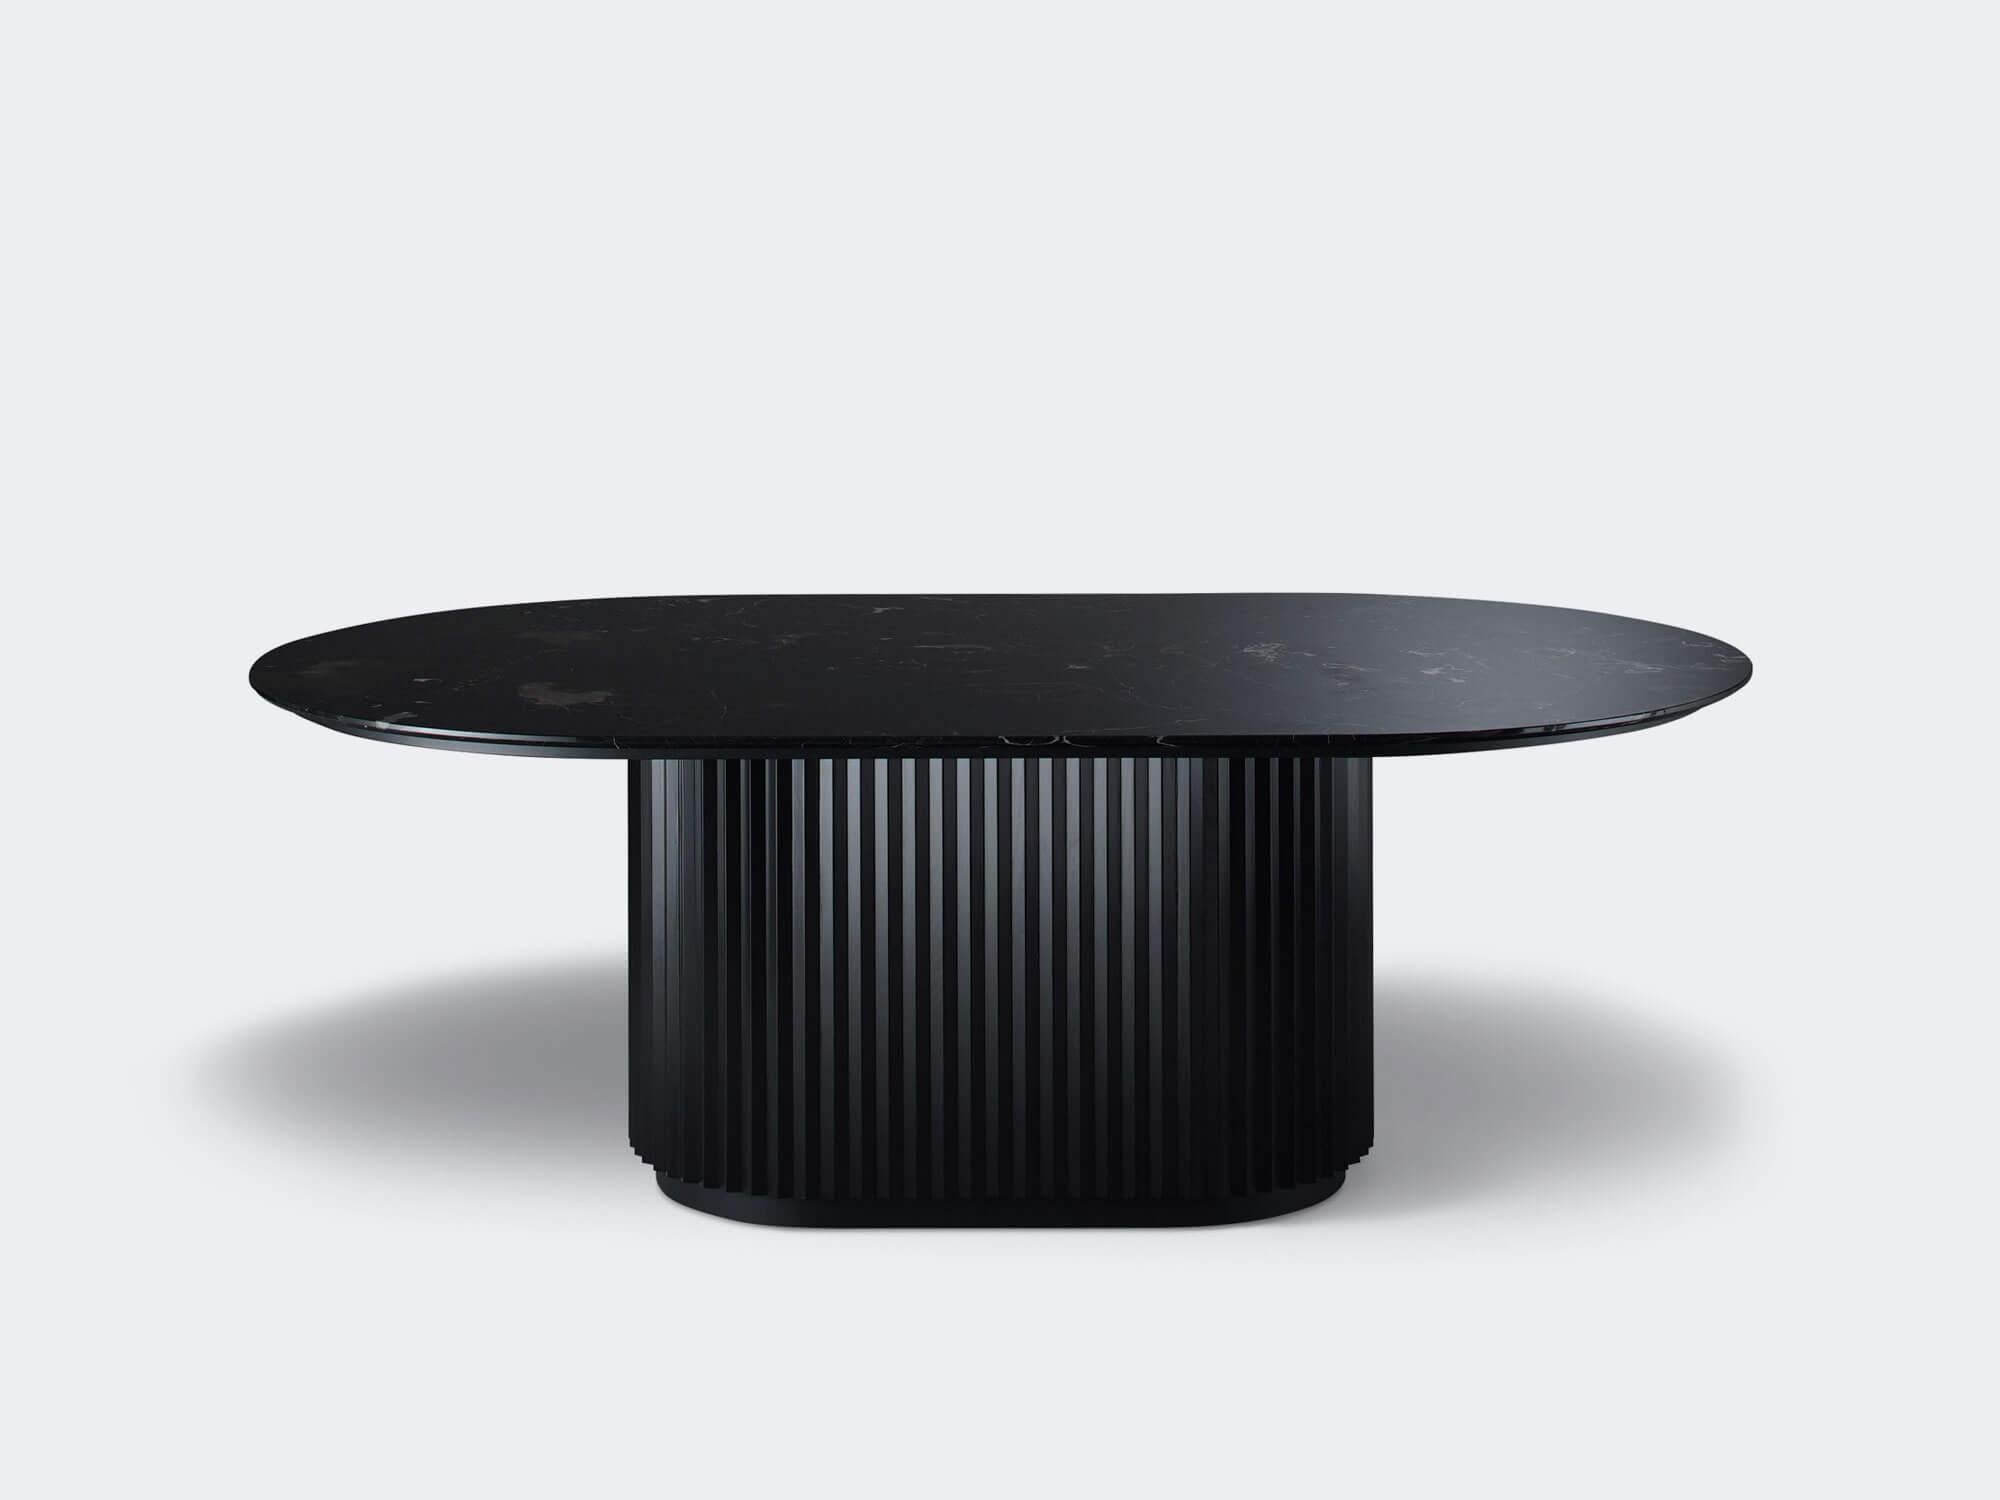 Eternel M Dining Table by Milla & Milli
Signed by Maša Vukmanović, Jelena Lukač Kirš, Jakov Šrajer
Dimensions: W 220 x D 130 x H 75 cm 
Materials: Ash Noir Lacquered, Black Metal, Marble Nero Marquina. 


Eternal Dining Table:
The centrepiece of